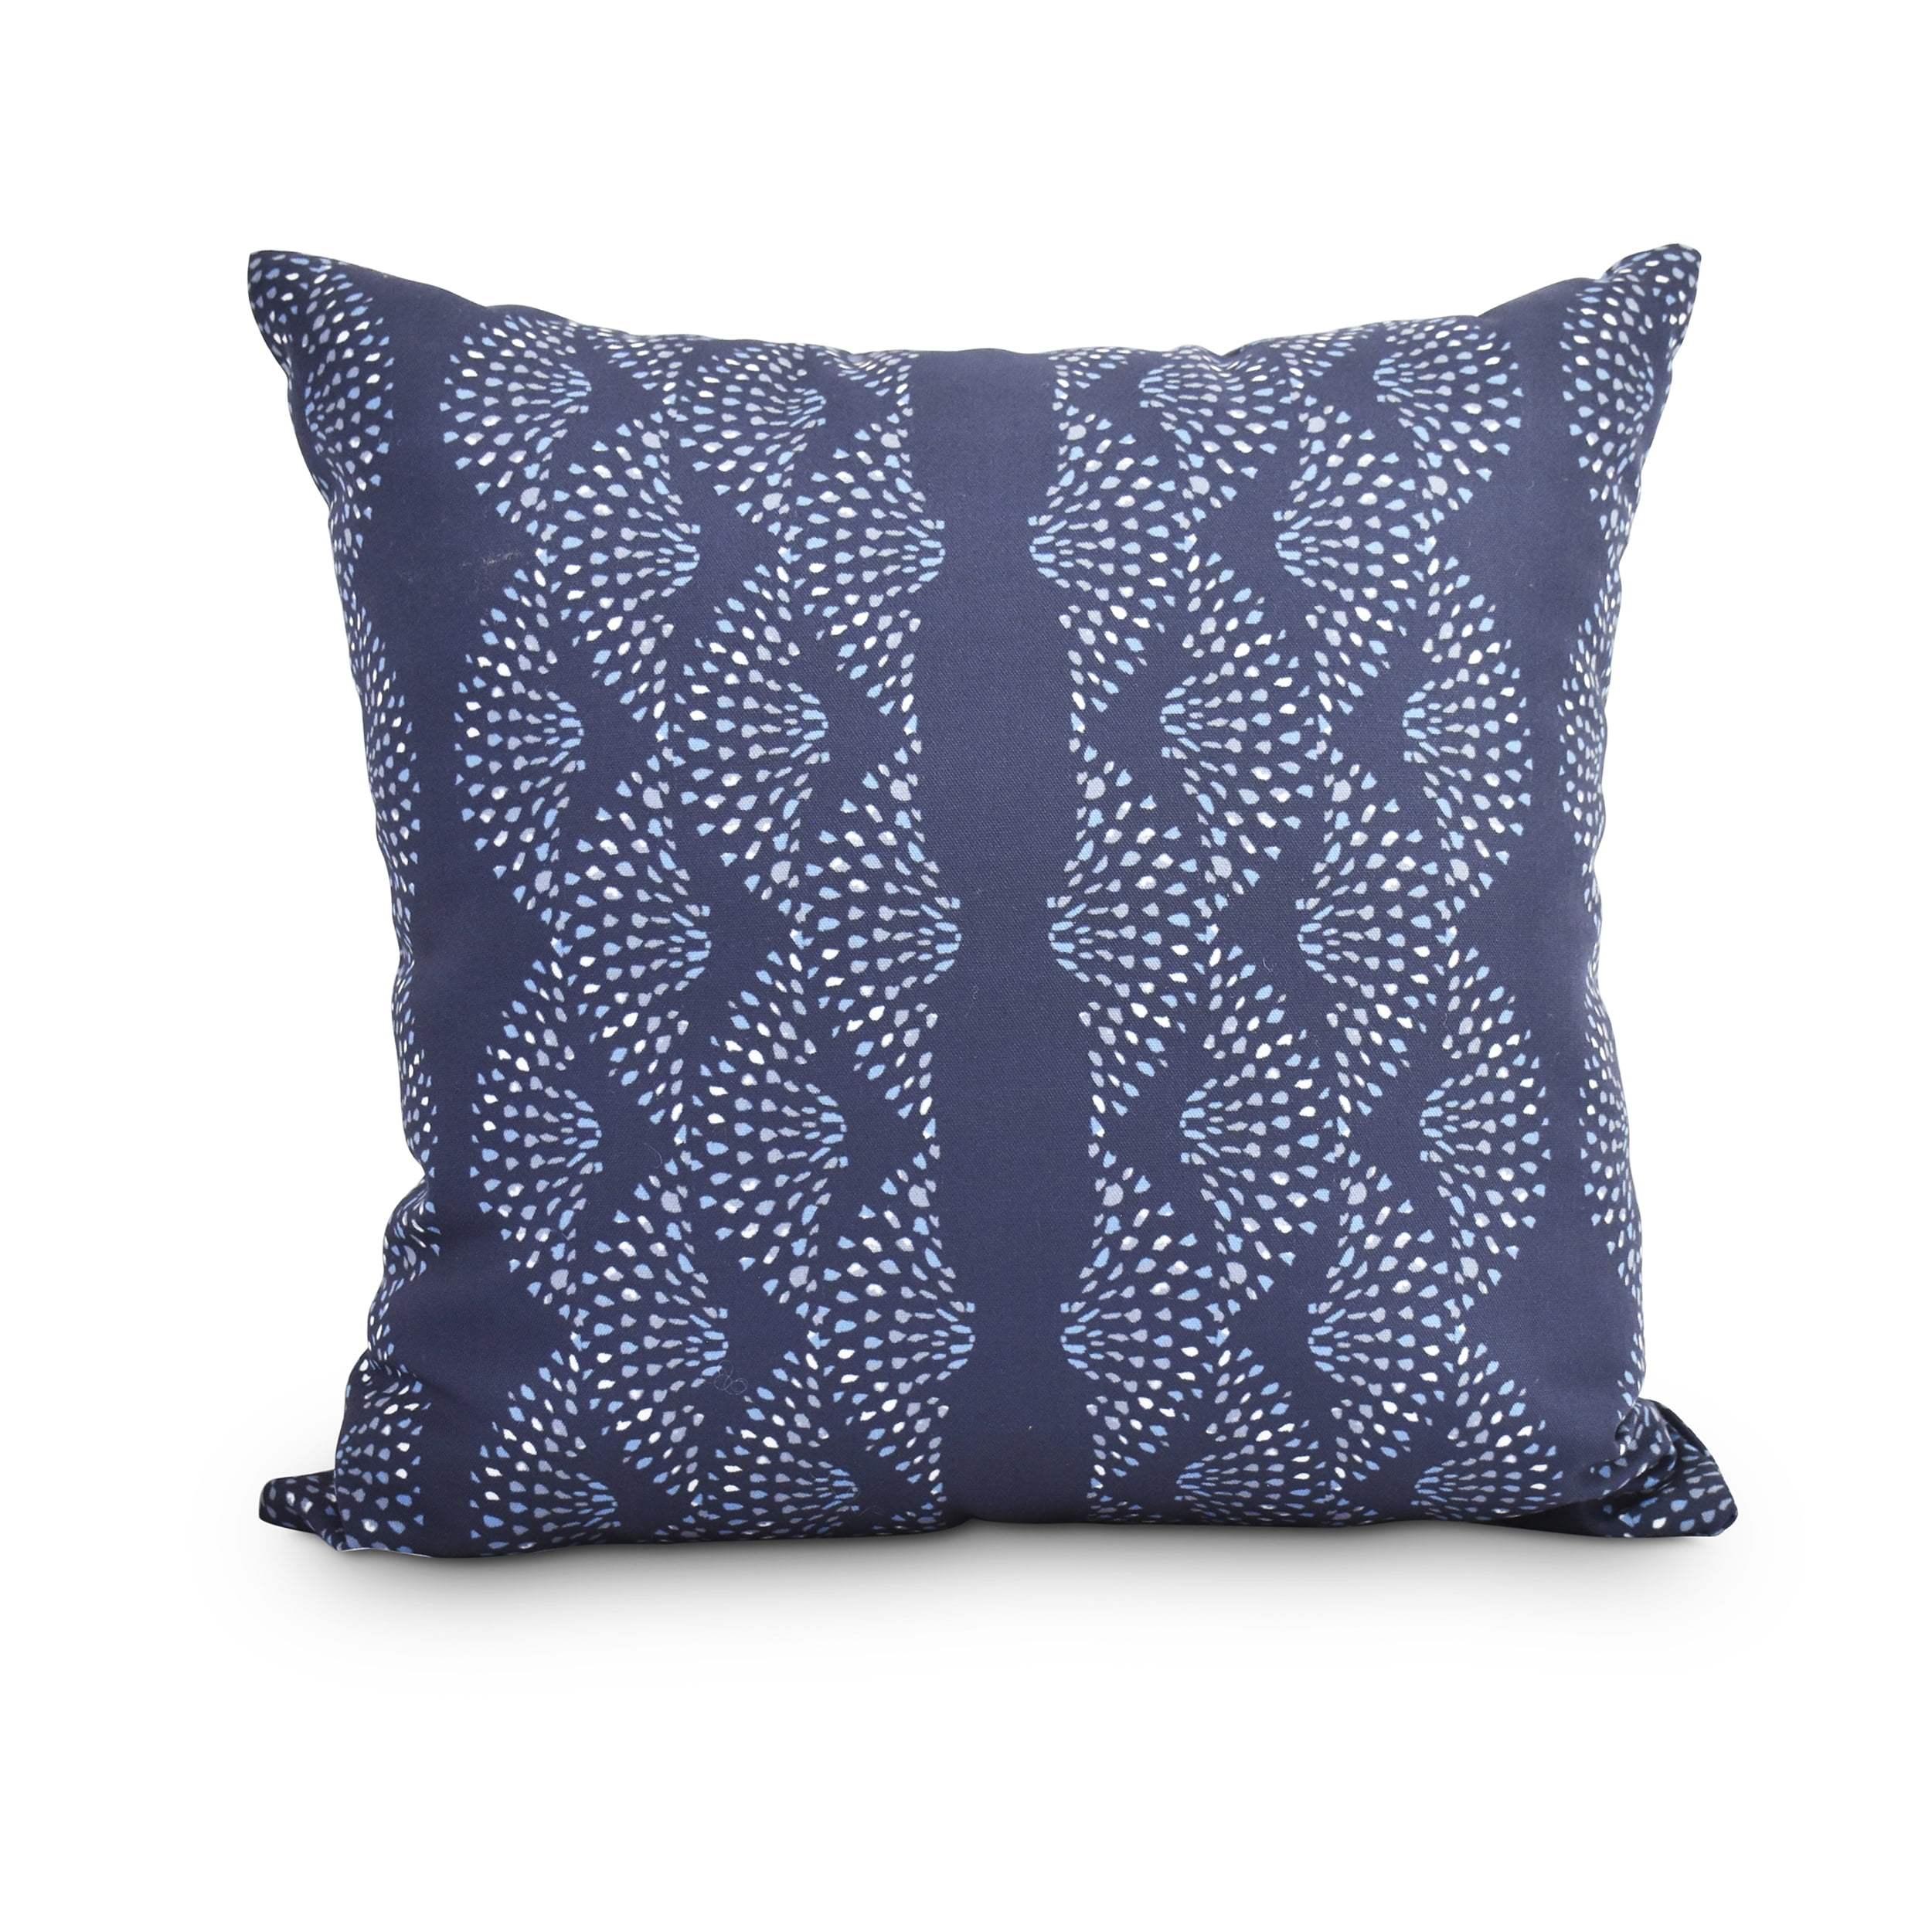 Prussian Blue Floral Paisley Cushion